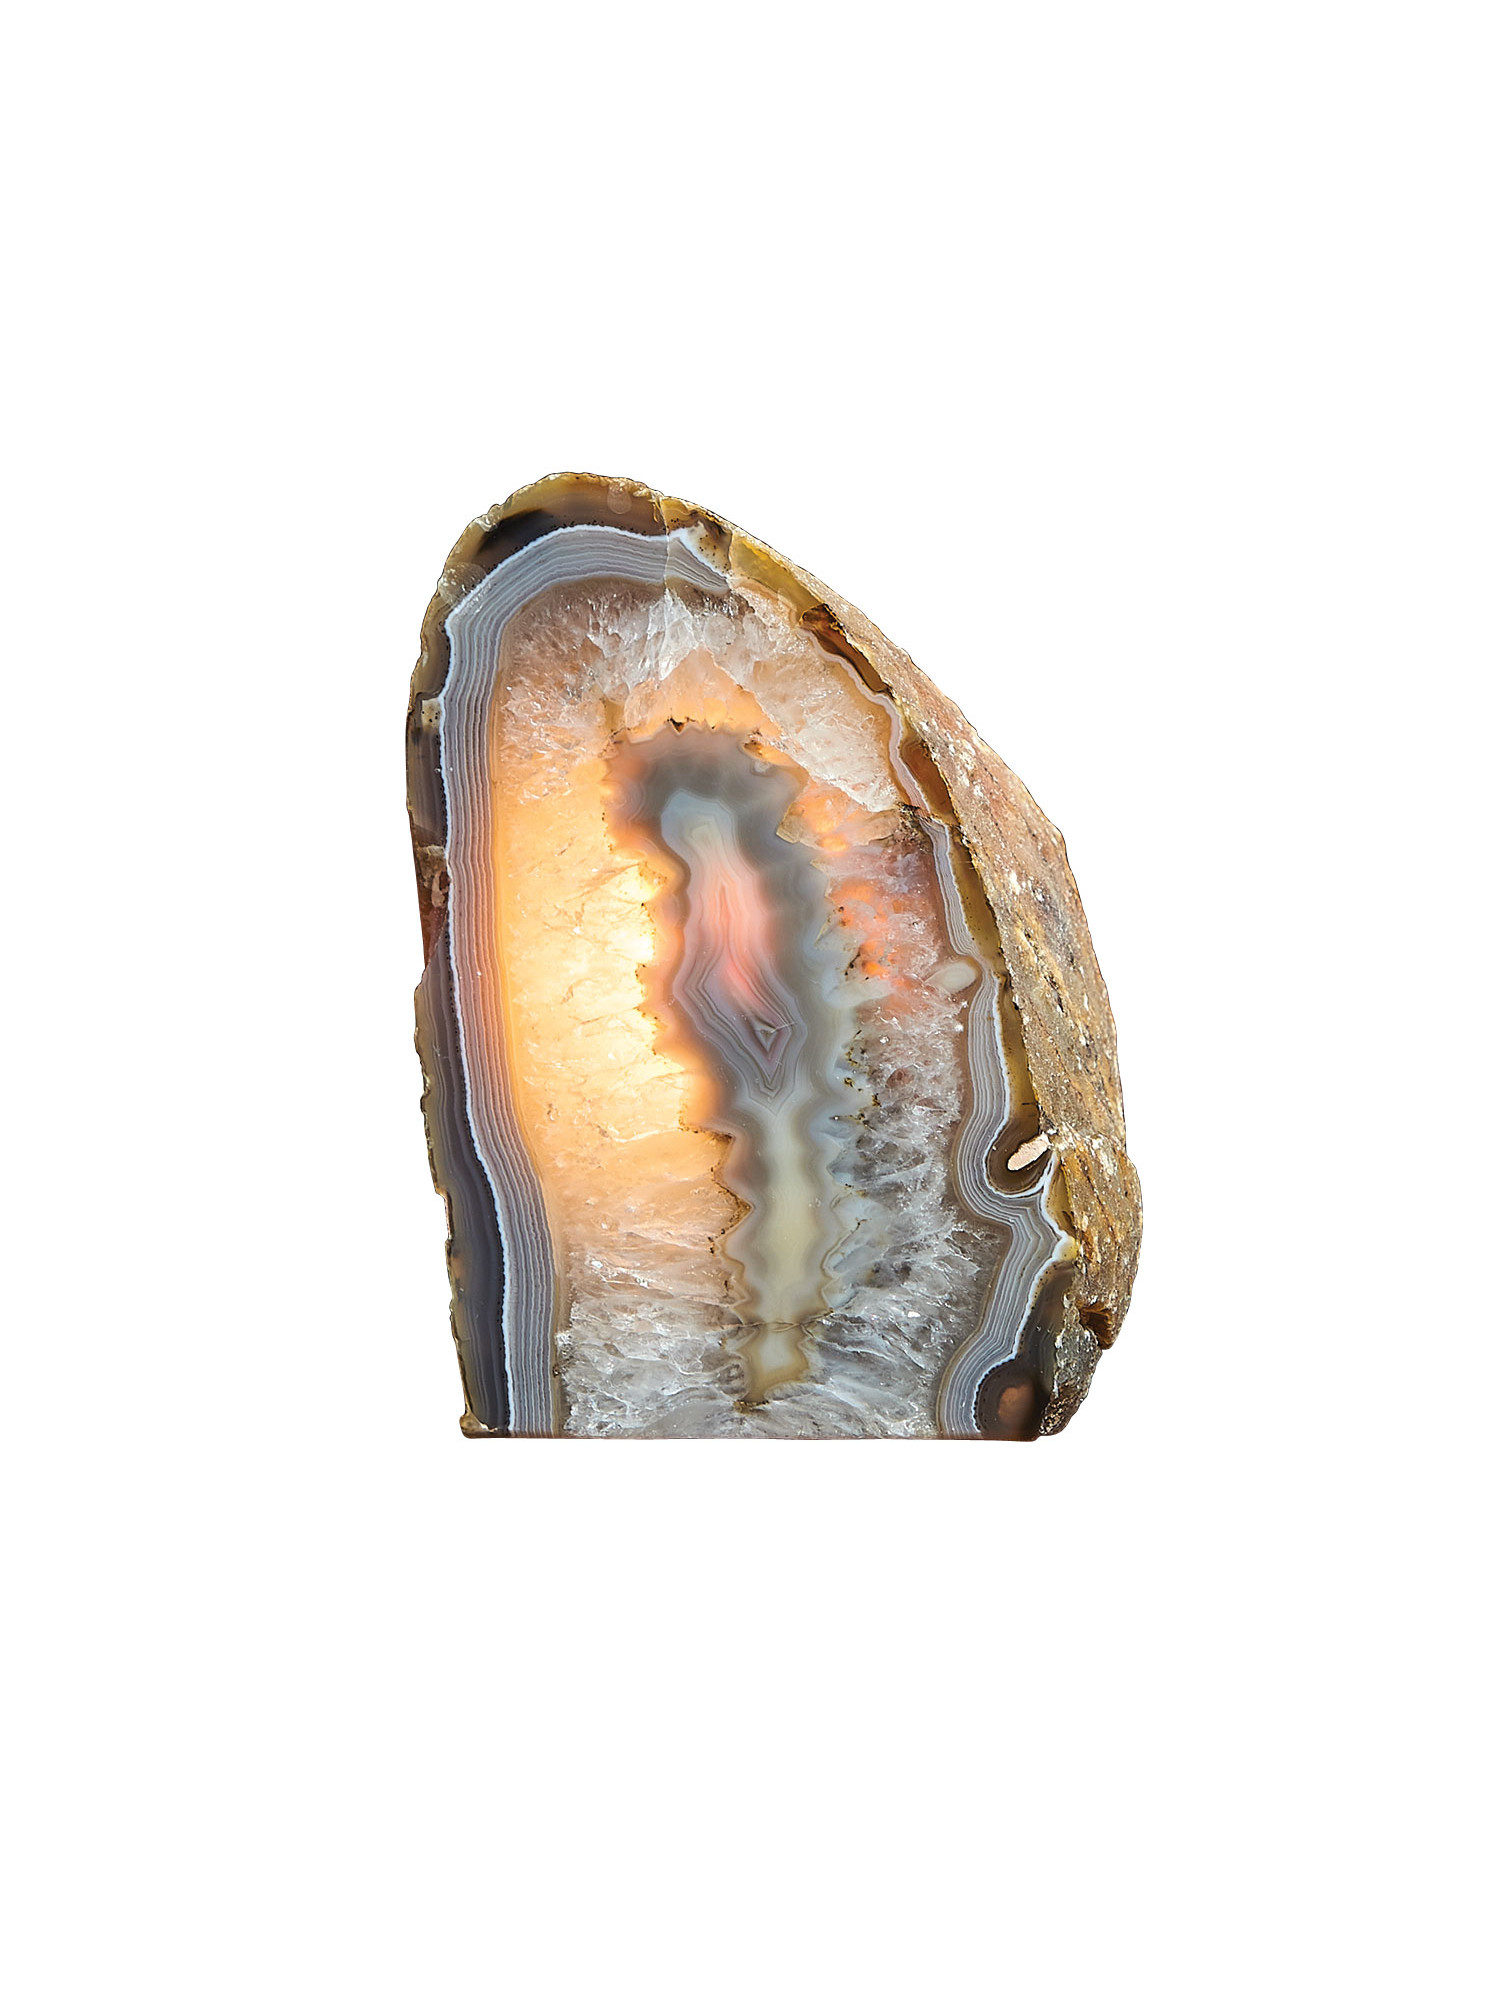 Product image for Geode Lamp